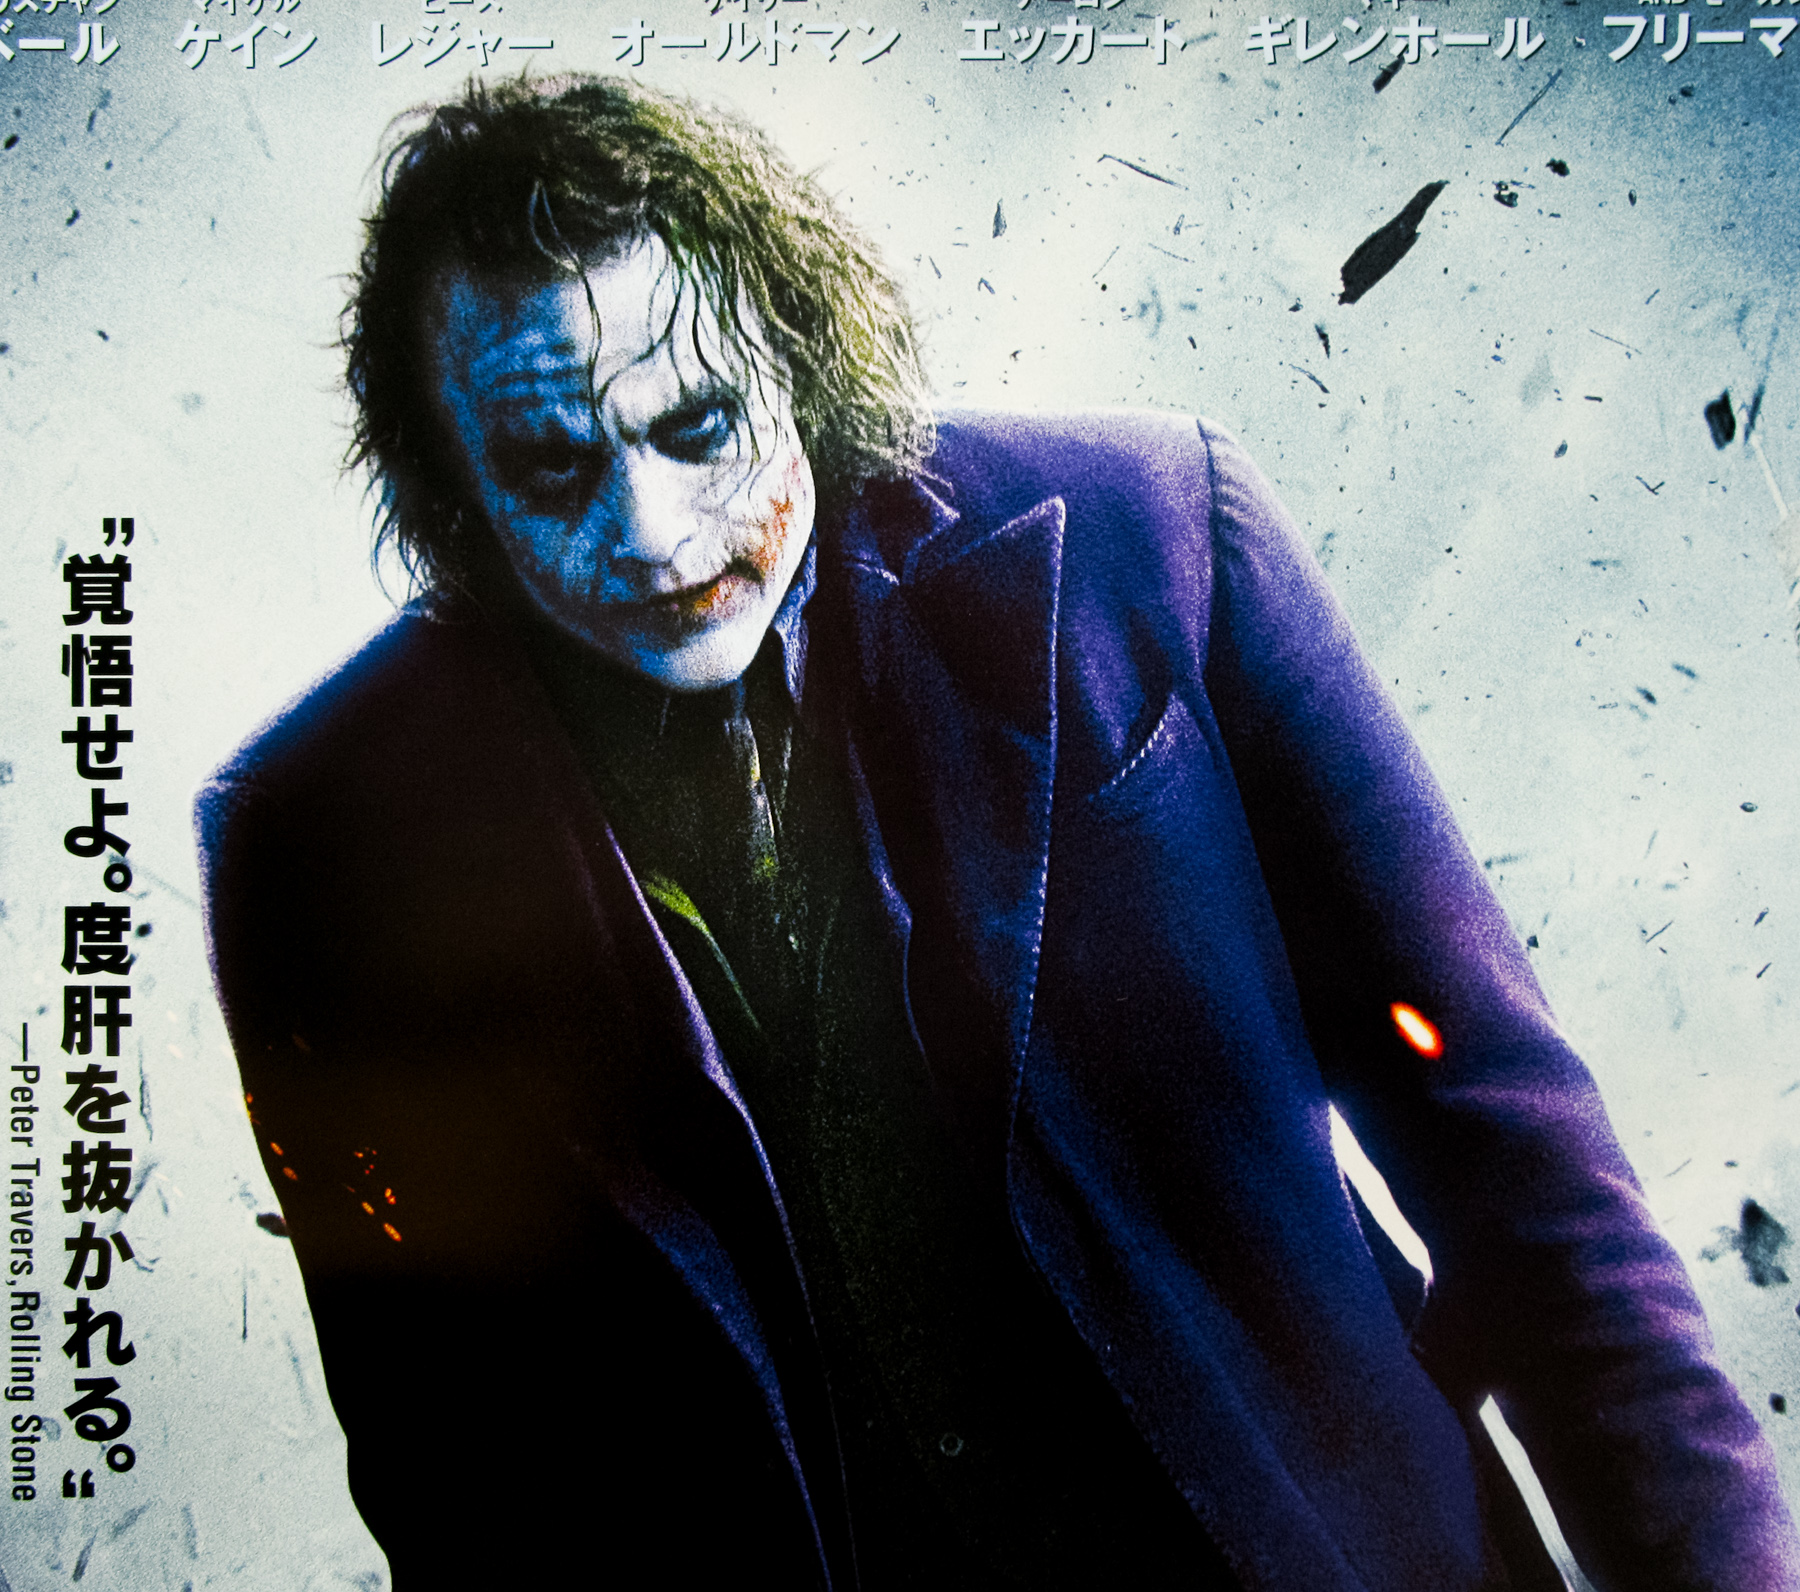 The Dark Knight / B2 / home video release / Japan